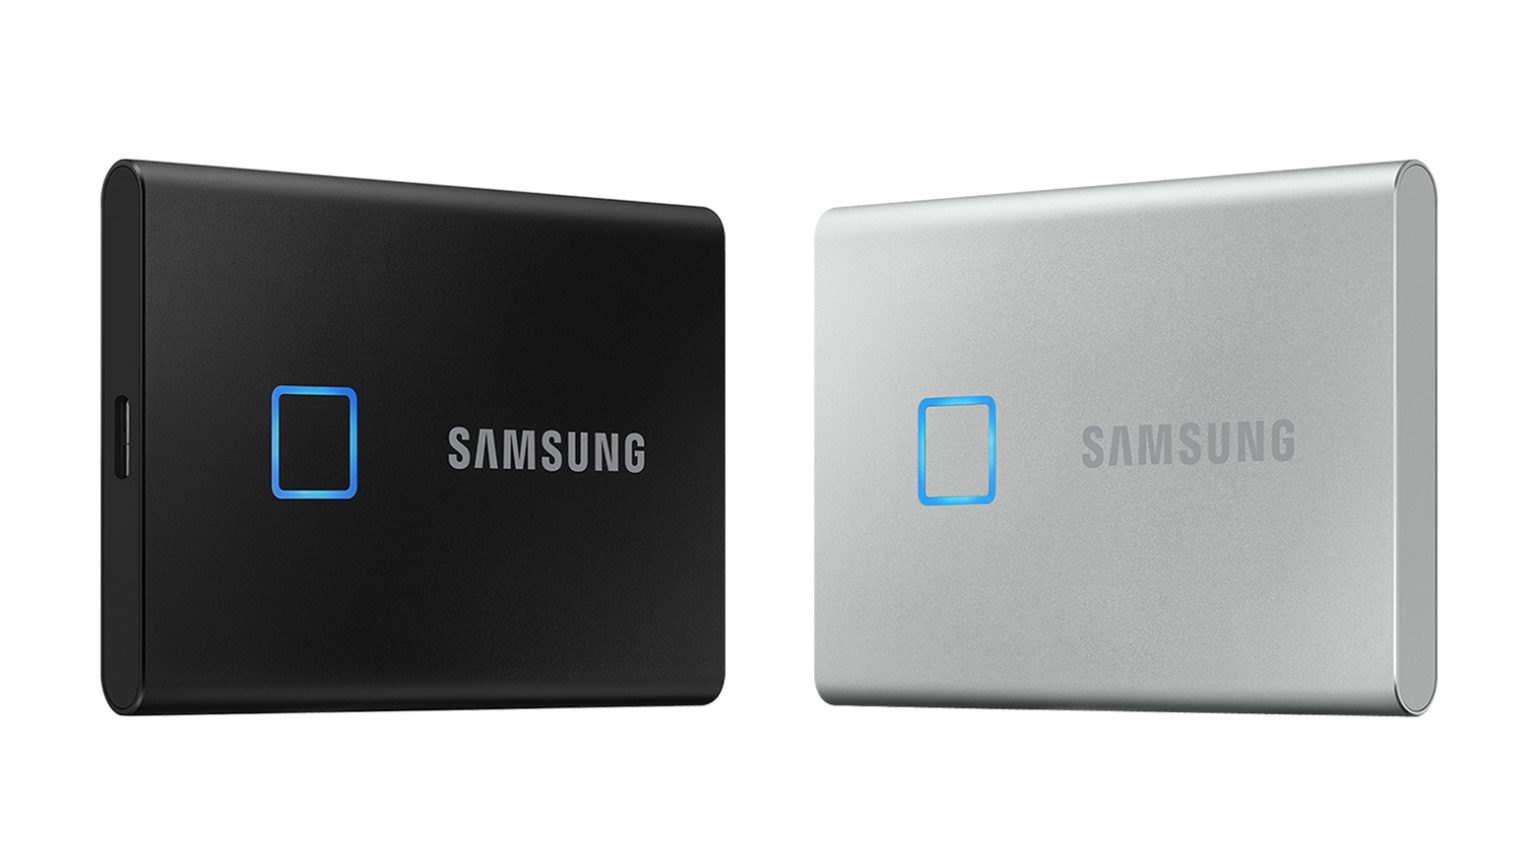 Samsung T7 Touch holds up to 2TB